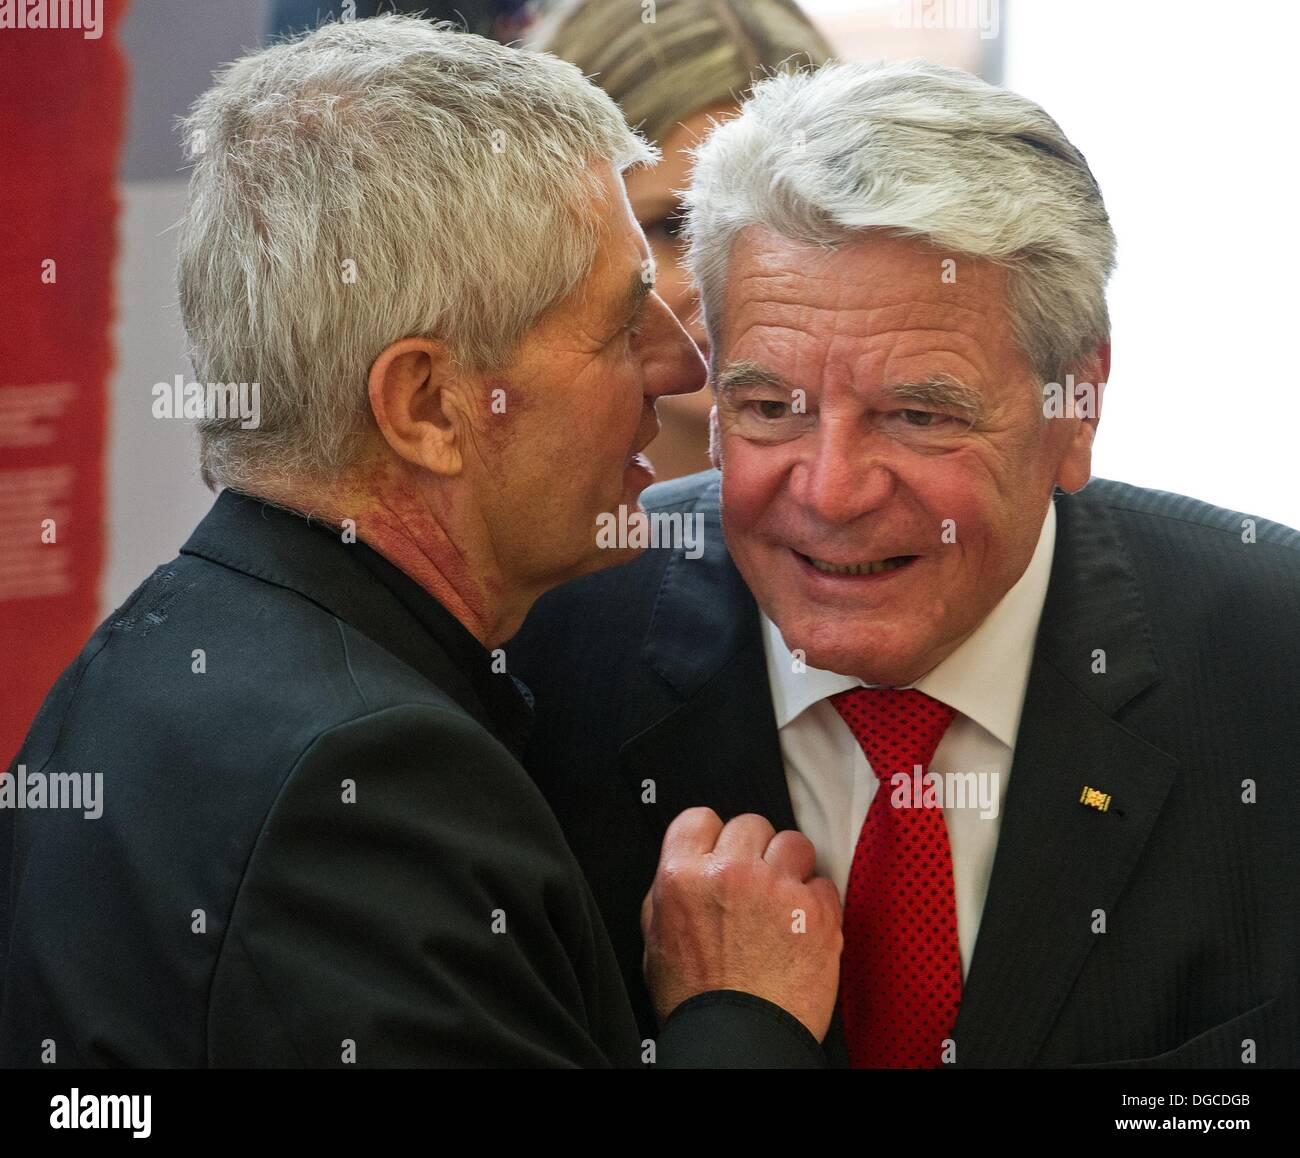 Frankfurt Oder, Germany. 18th Oct, 2013. German President Joachim Gauck (R) greets Federal Commissioner for the Stasi Archives Roland Jahn (L) in the exhibition 'Learn Polish' at at Viadrina European University in Frankfurt Oder, Germany, 18 October 2013. Both presidents opened the academic year during a visit to the Viadrina European University and the Collegium Polonicum. Photo: Patrick Pleul/dpa/Alamy Live News Stock Photo